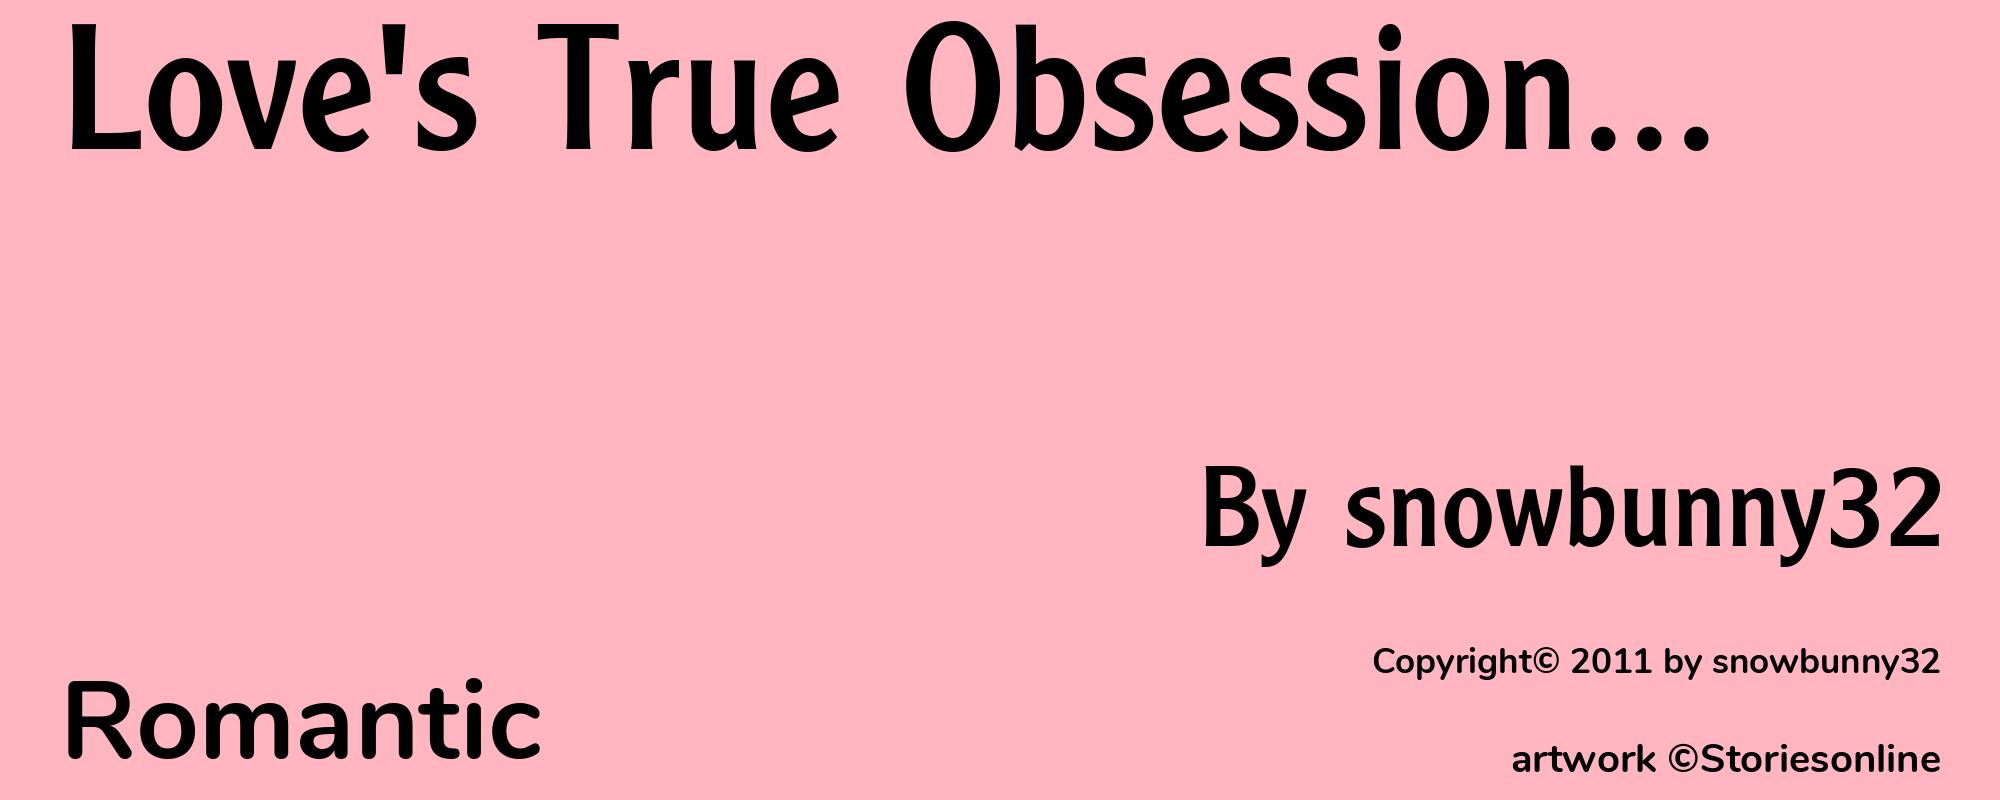 Love's True Obsession... - Cover